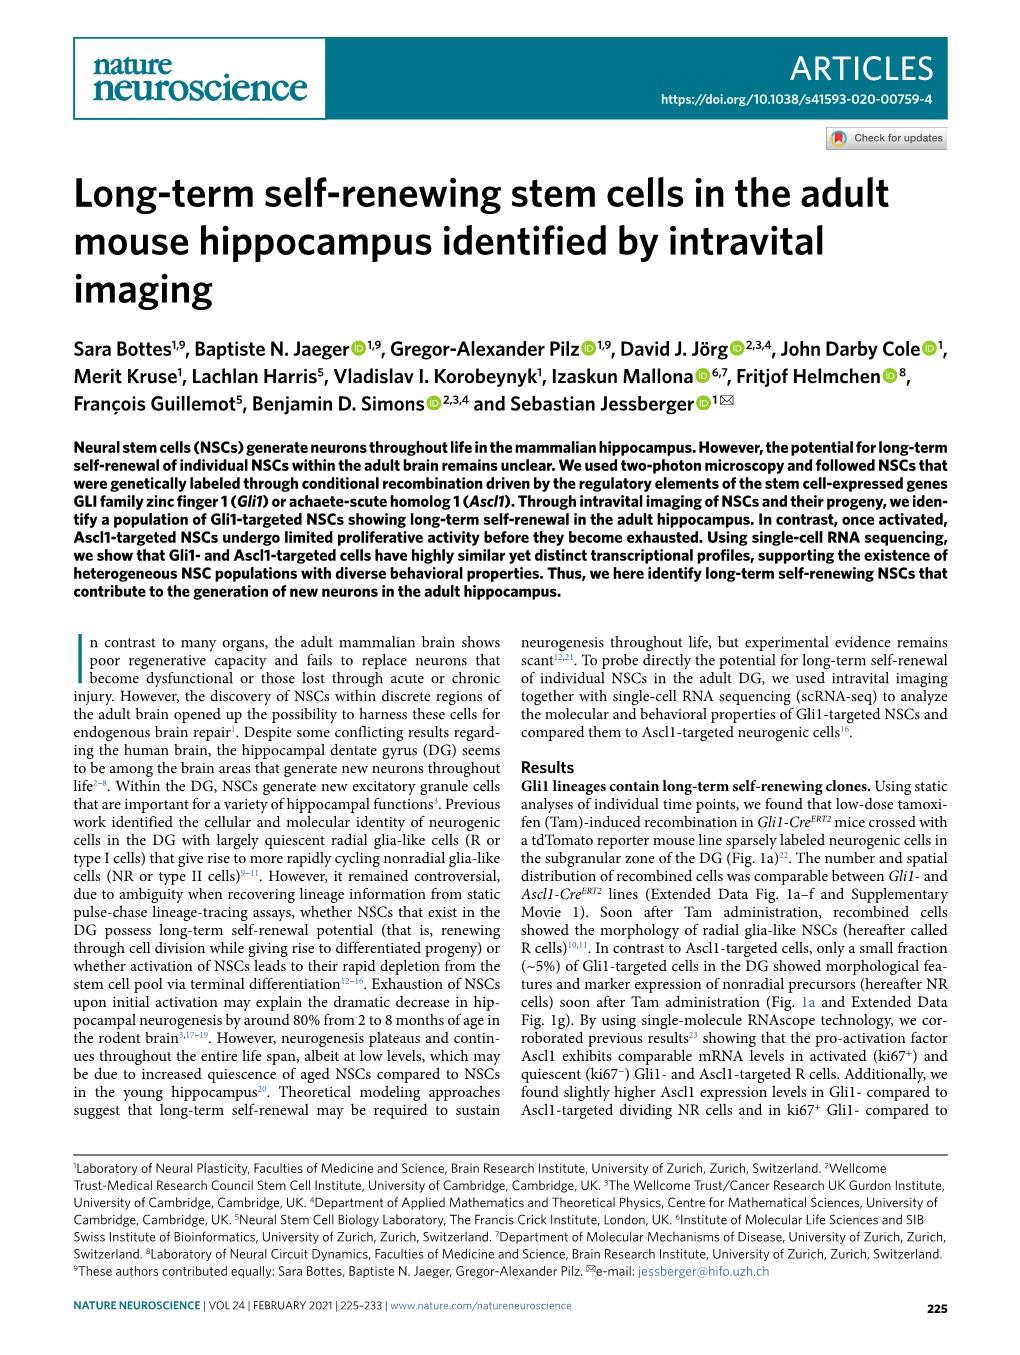 Long-Term Self-Renewing Stem Cells in the Adult Mouse Hippocampus Identified by Intravital Imaging